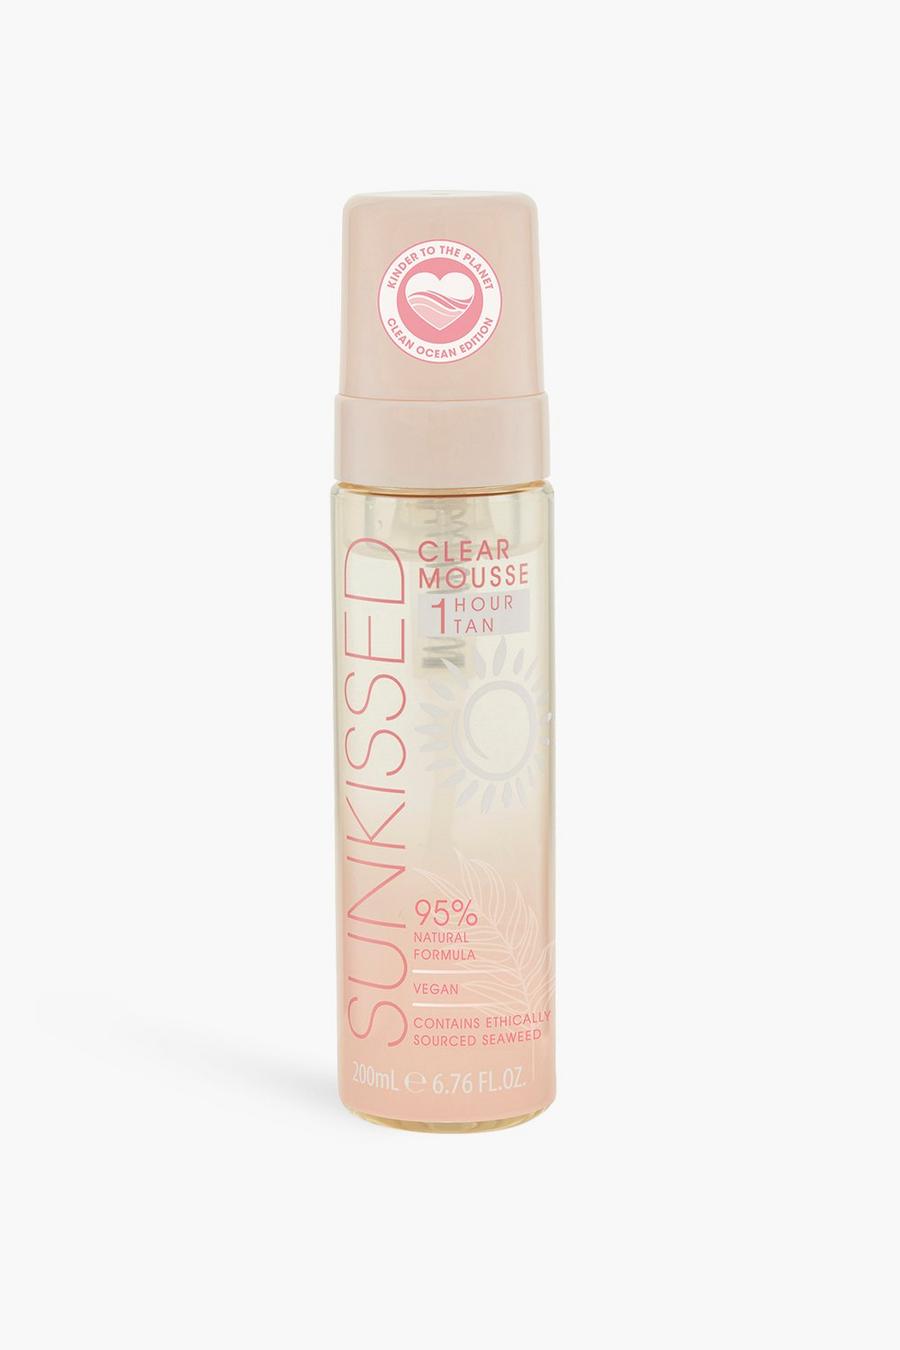 Sunkissed Clear Mousse 1 Hour Tan 200ml Clean